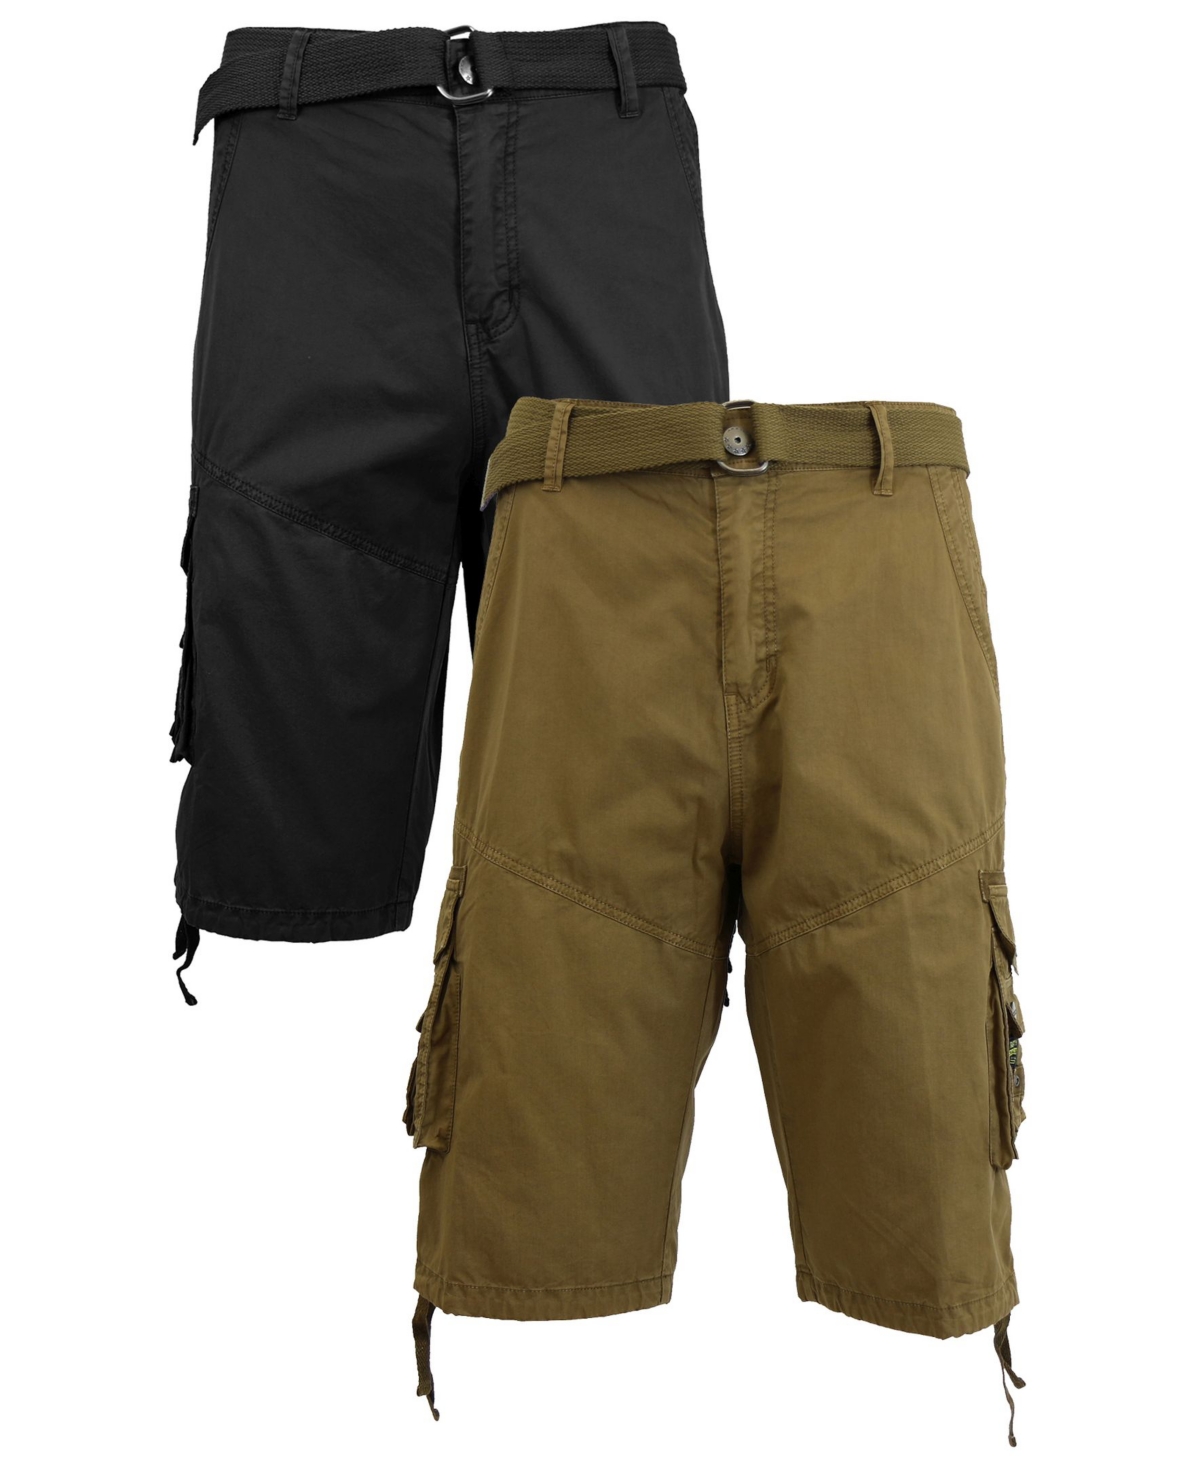 Men's Belted Cargo Shorts with Twill Flat Front Washed Utility Pockets, Pack of 2 - Khaki and Timber